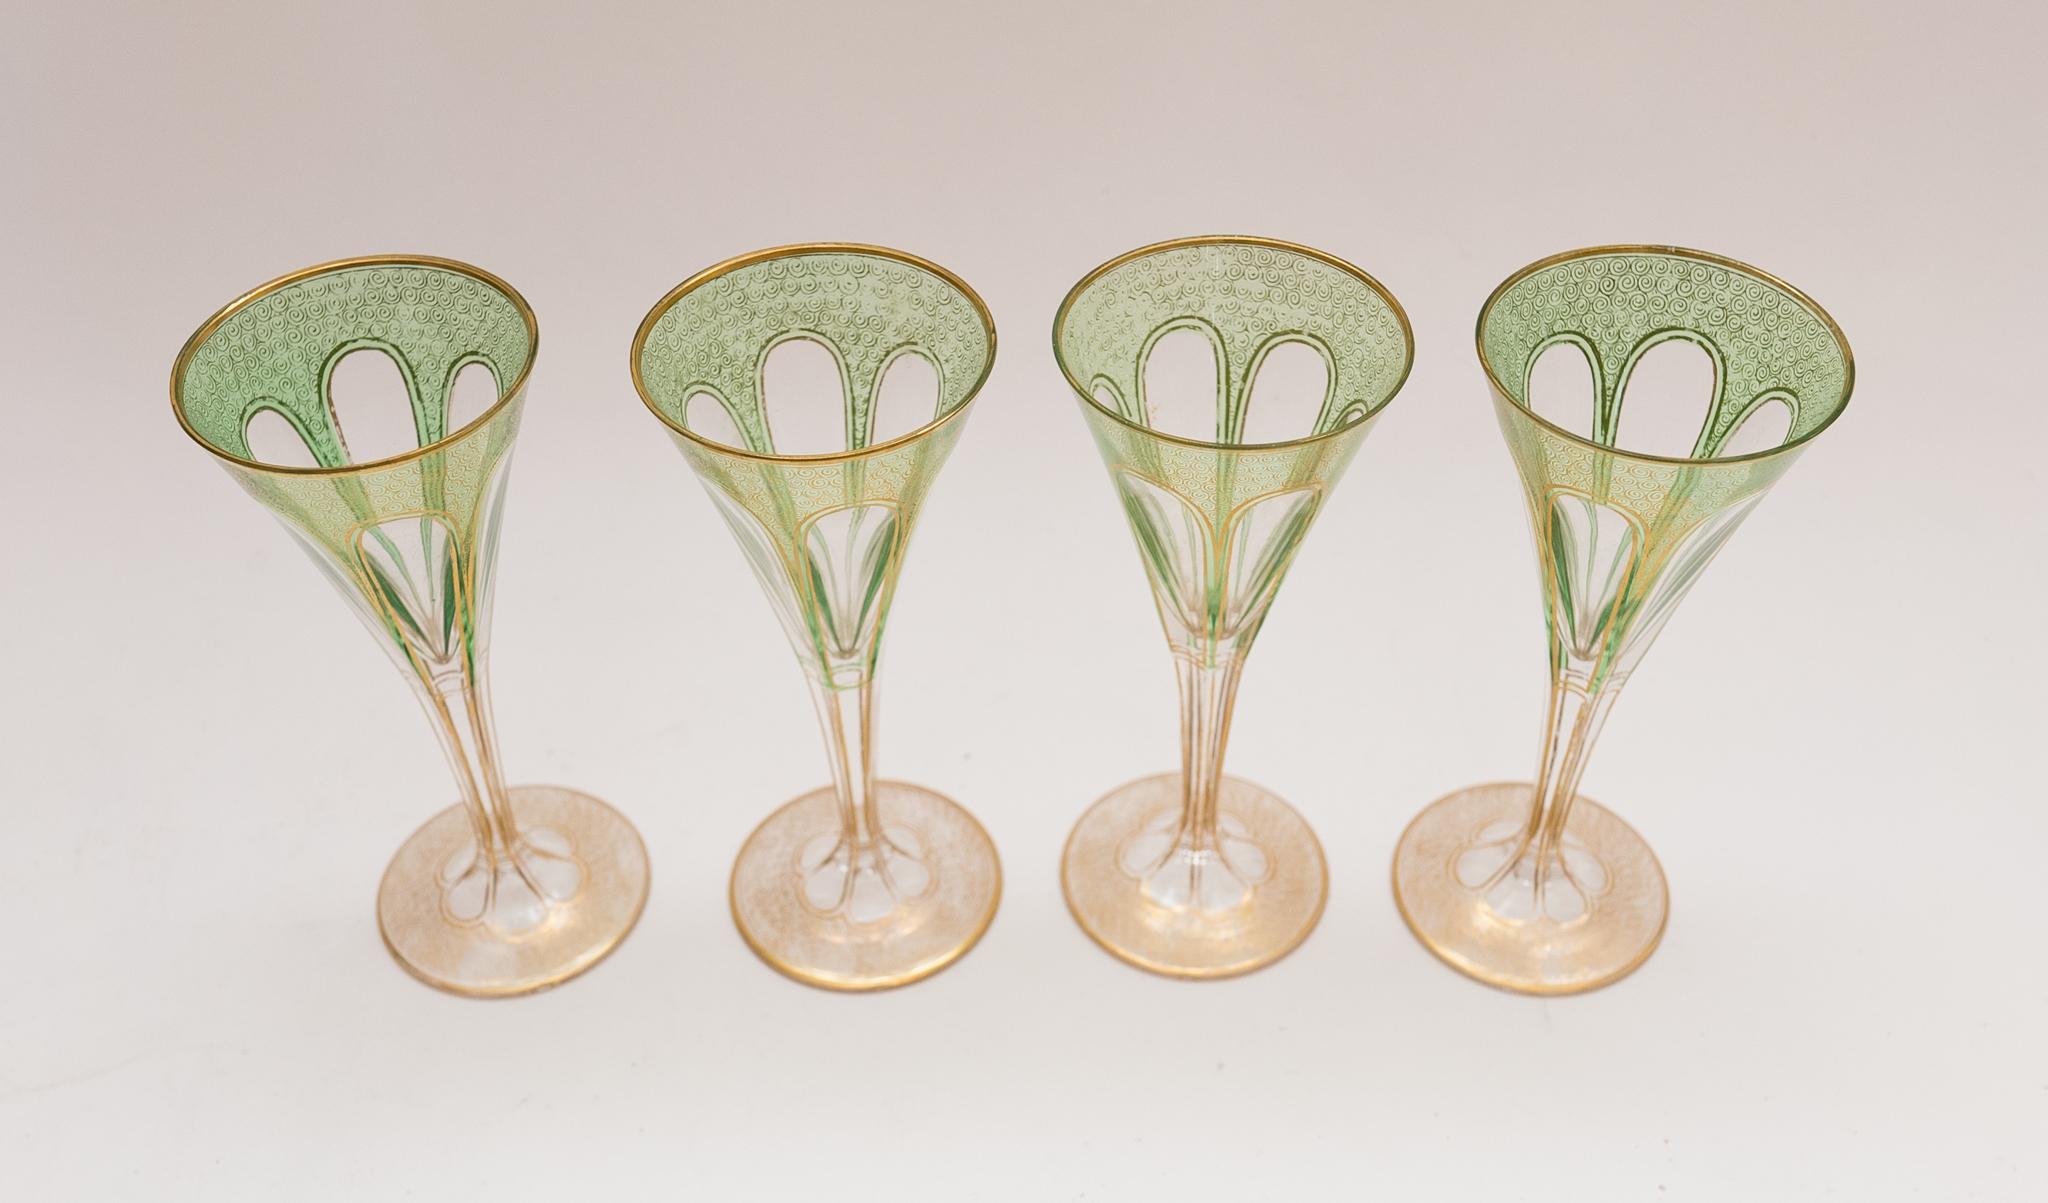 Hand-Crafted Set of 4 Antique Moser Green & Gilt Crystal Champagne or Cocktail Glasses